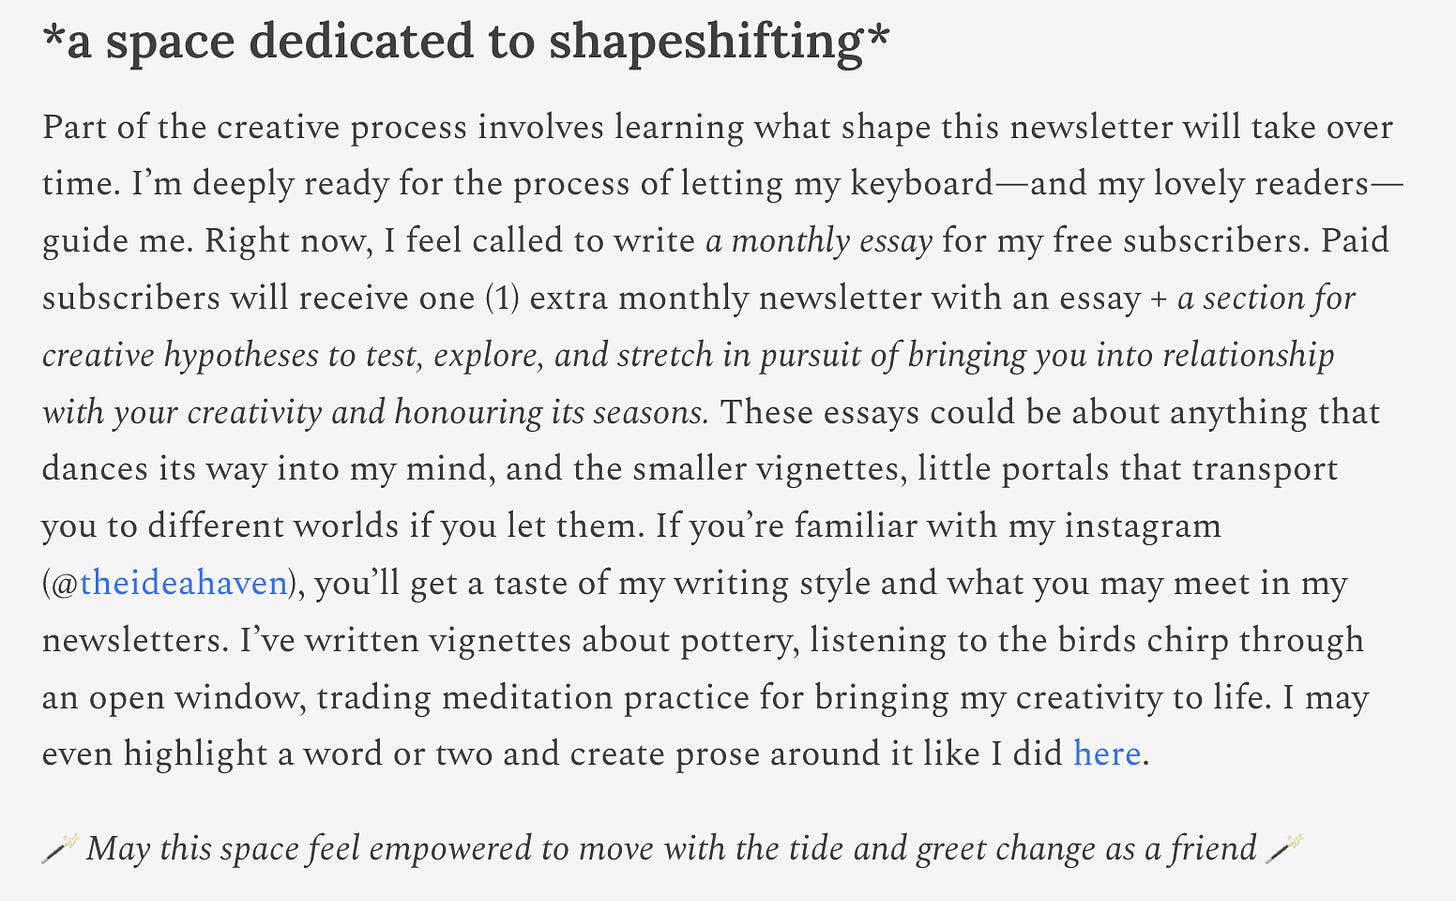 A written description about my substack being a space dedicated to shapeshifting